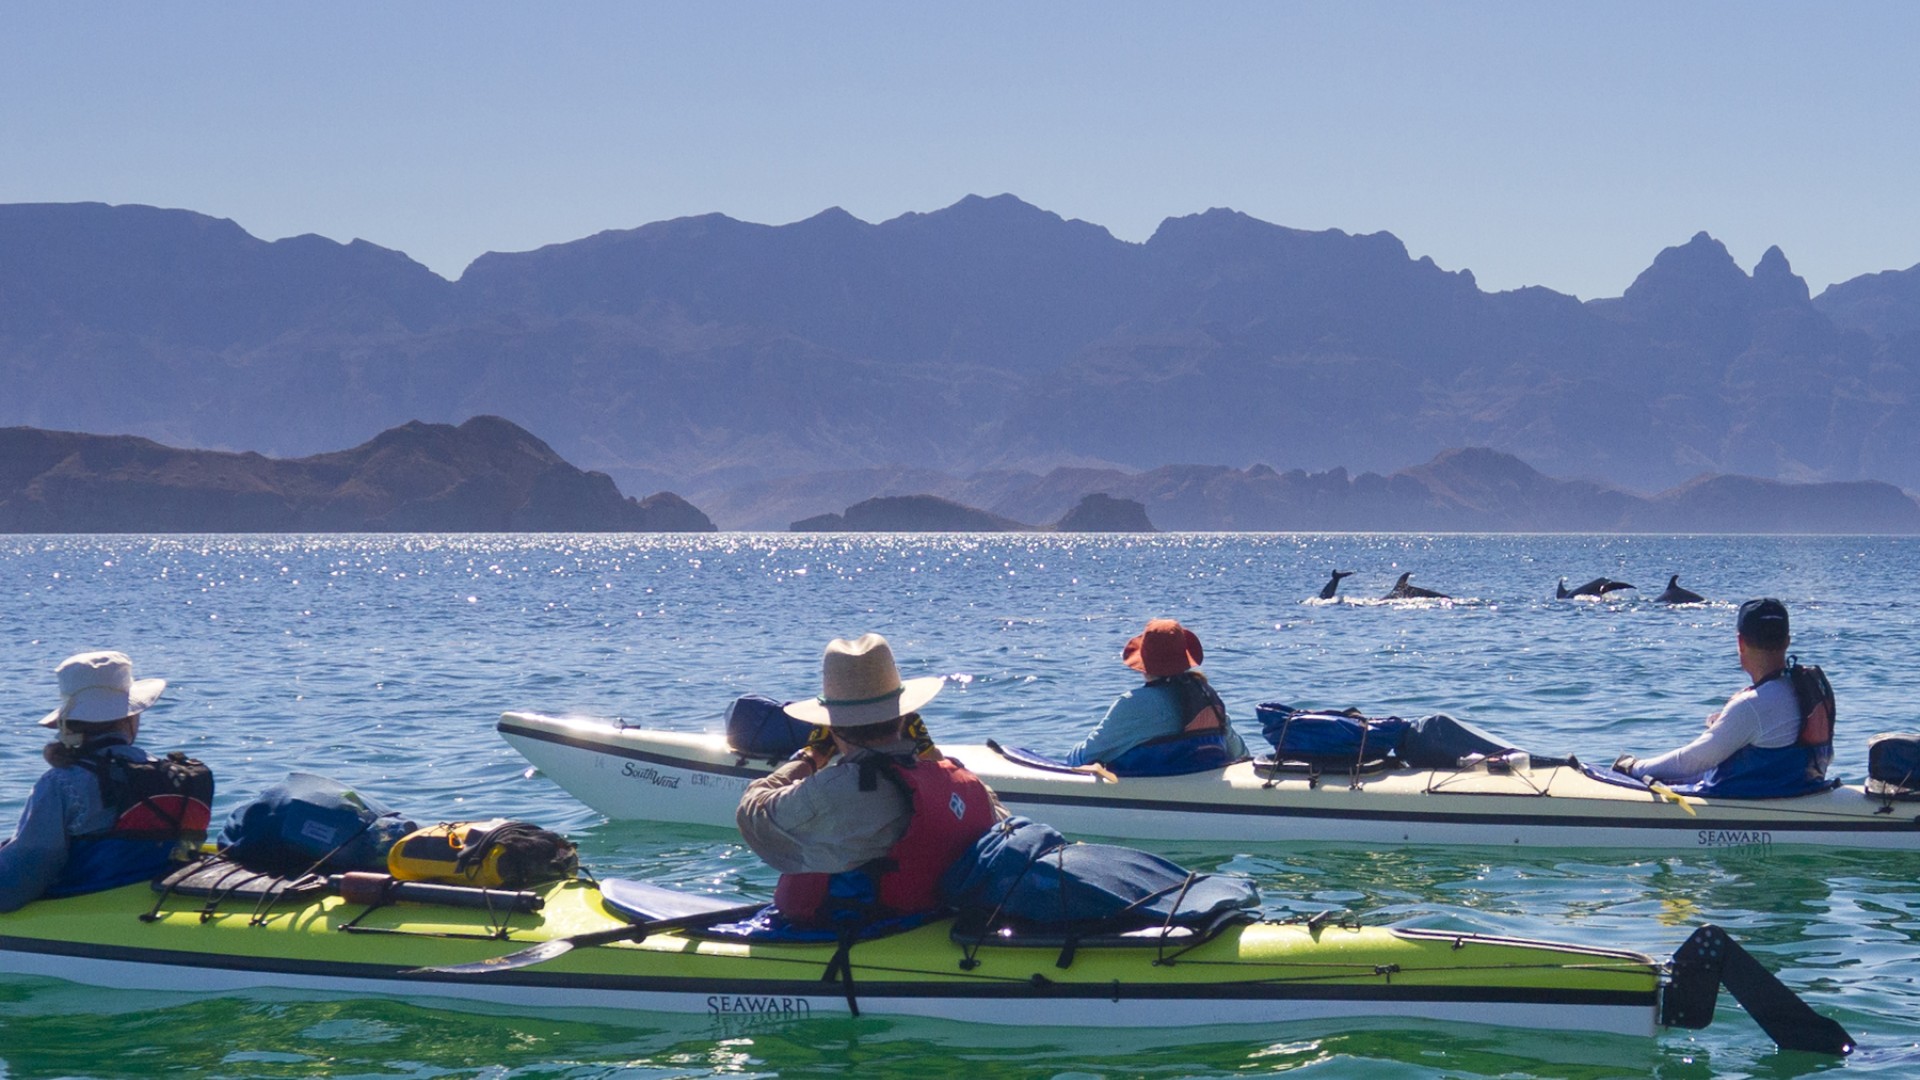 Sea kayakers paddling in the Sea of Cortez with the islands of Loreto Bay scattered behind them